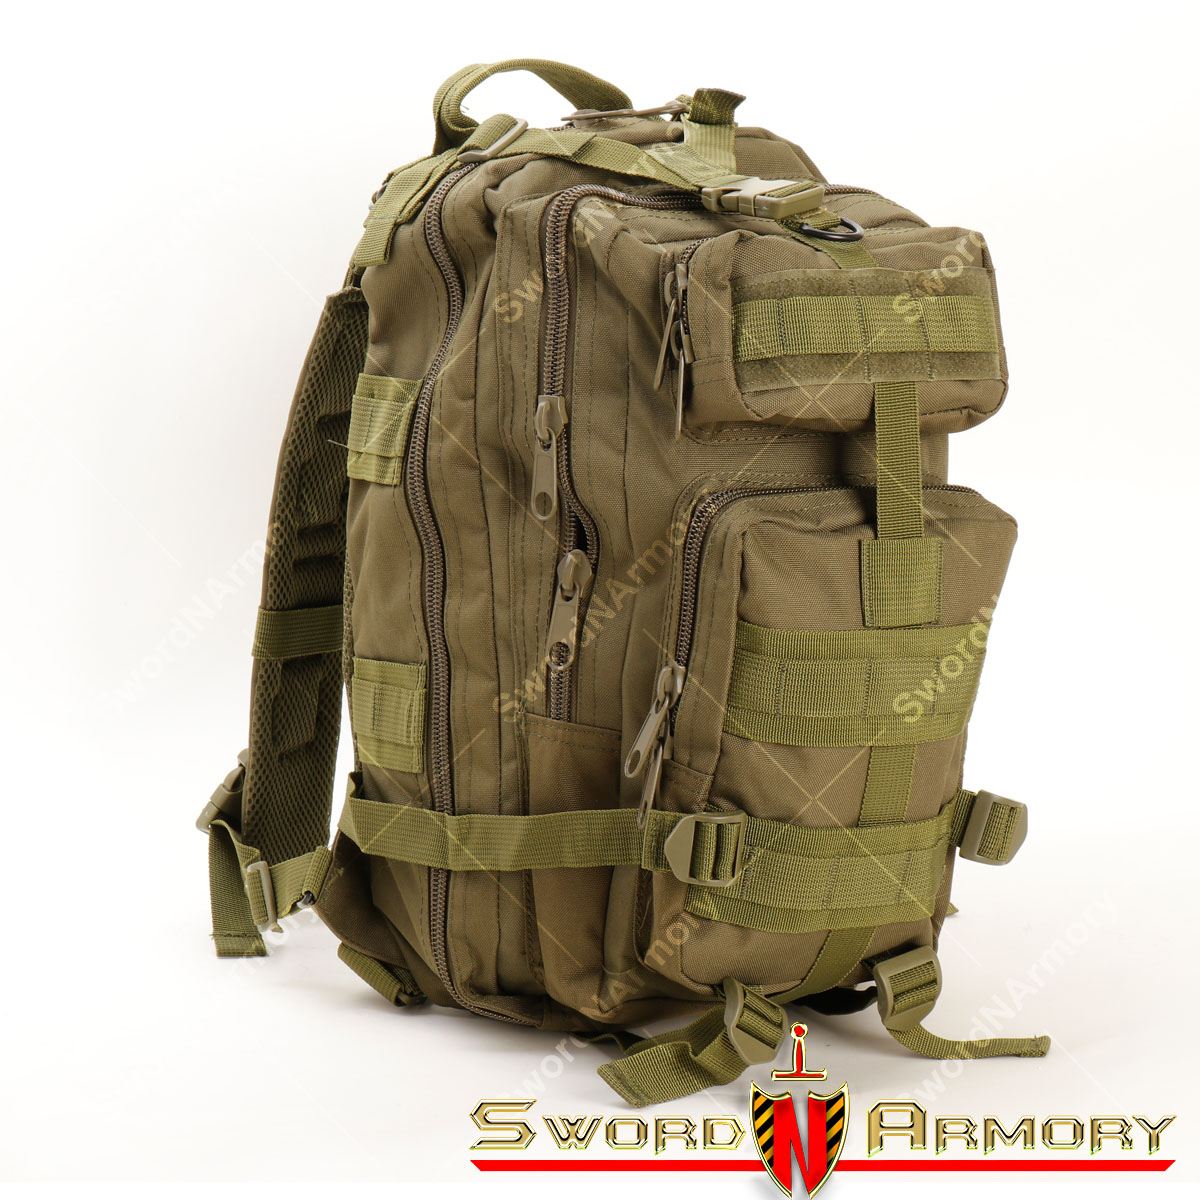 Tactical Backpack Hiking Outdoor Military Pack Camping Army Tracking Travel Bag